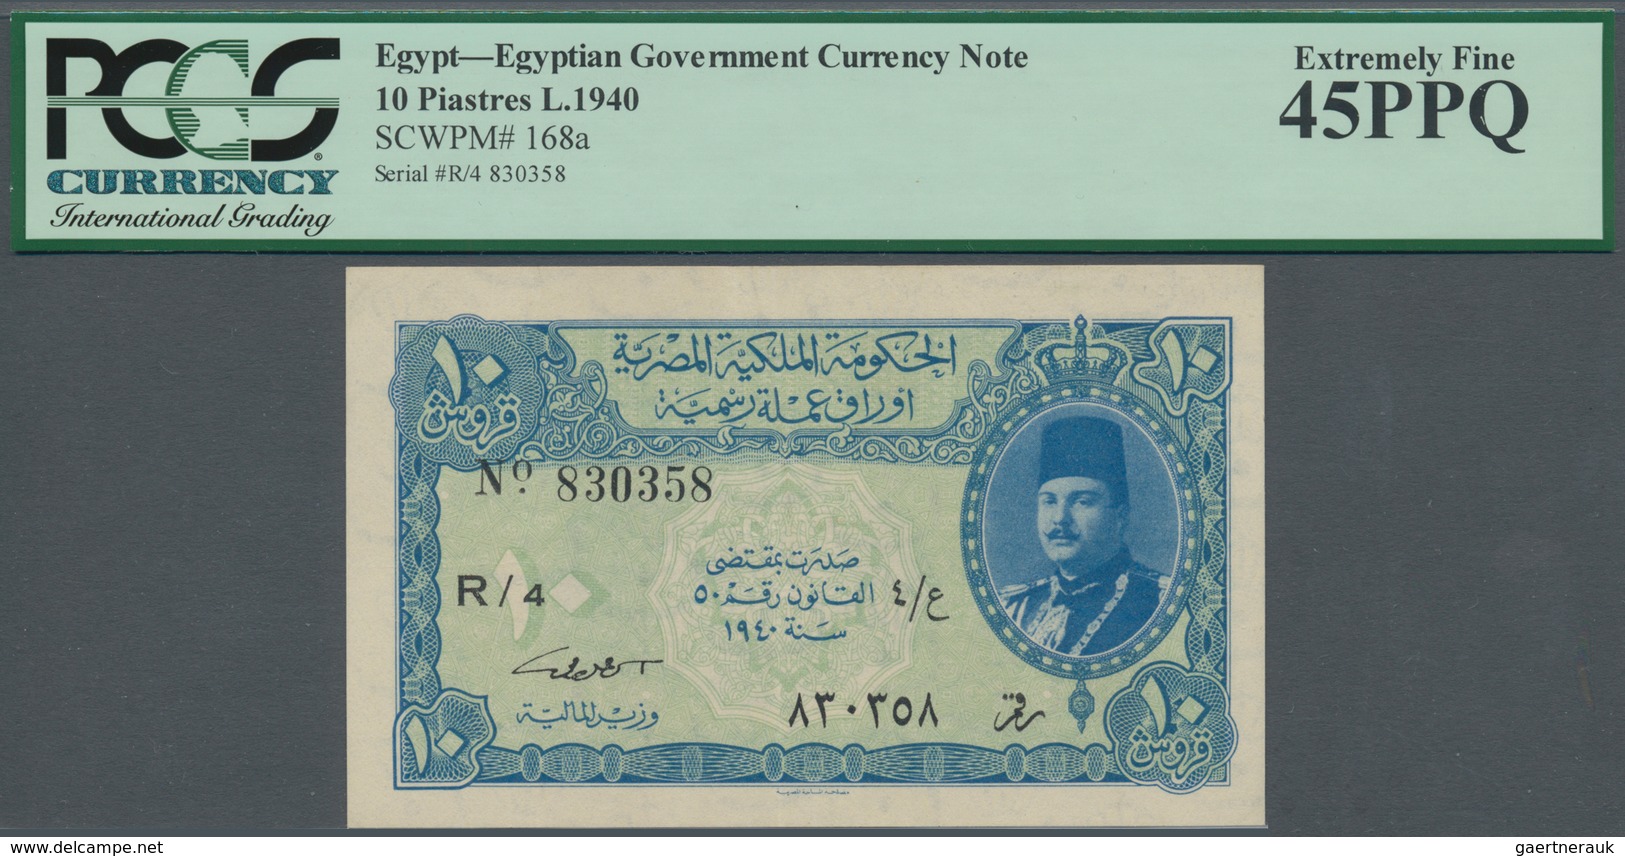 Egypt / Ägypten: 10 Piastres L.1940 P. 168a, Very Clean Condition For This Type Of Note, Crisp Paper - Egipto